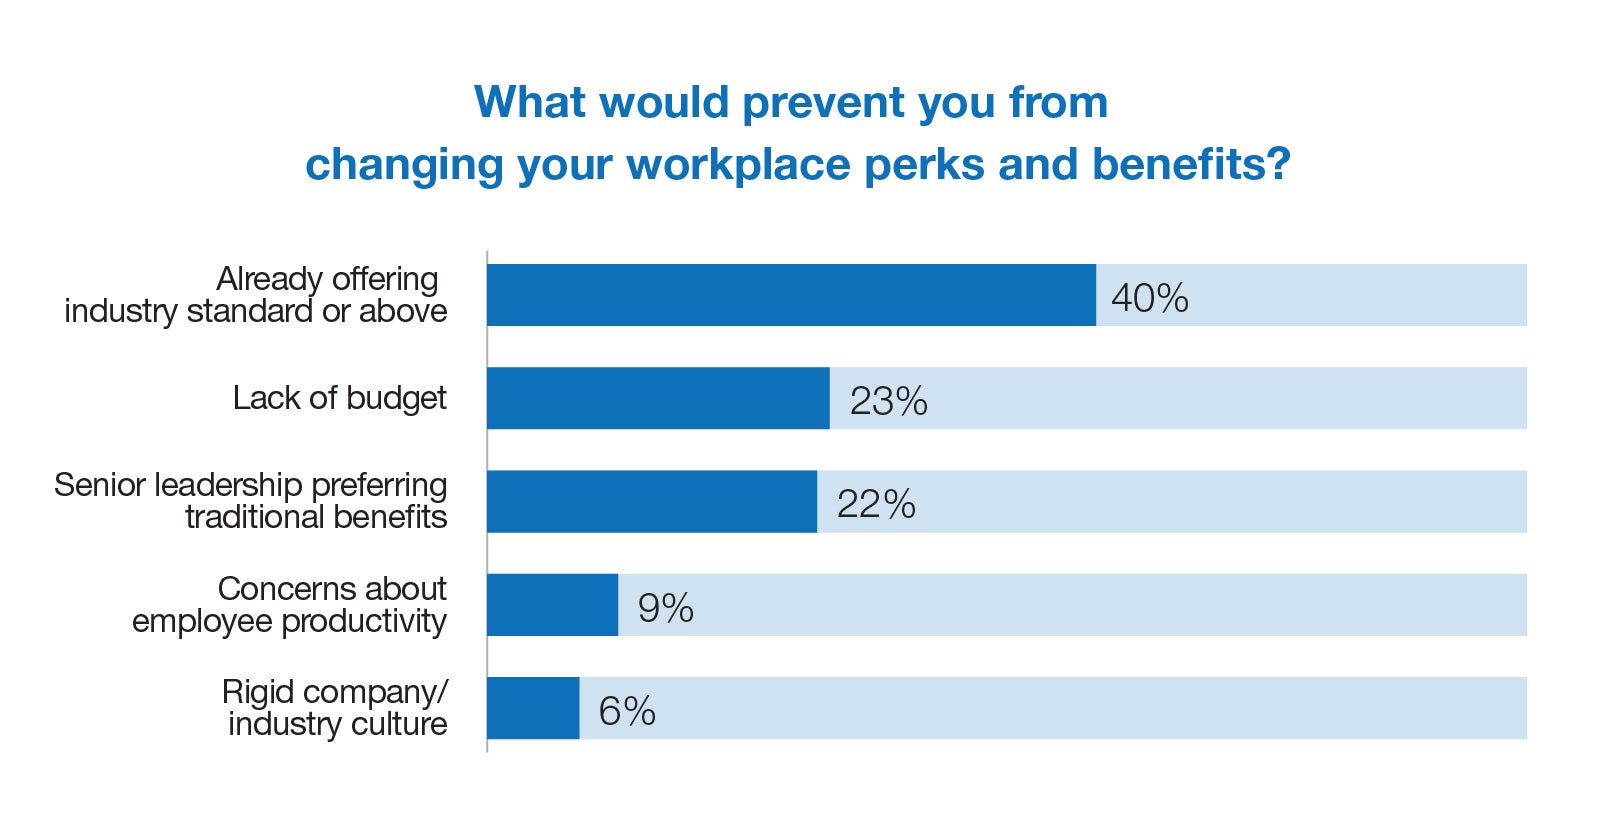 What would you prevent you from changing your workplace perks and benefits?